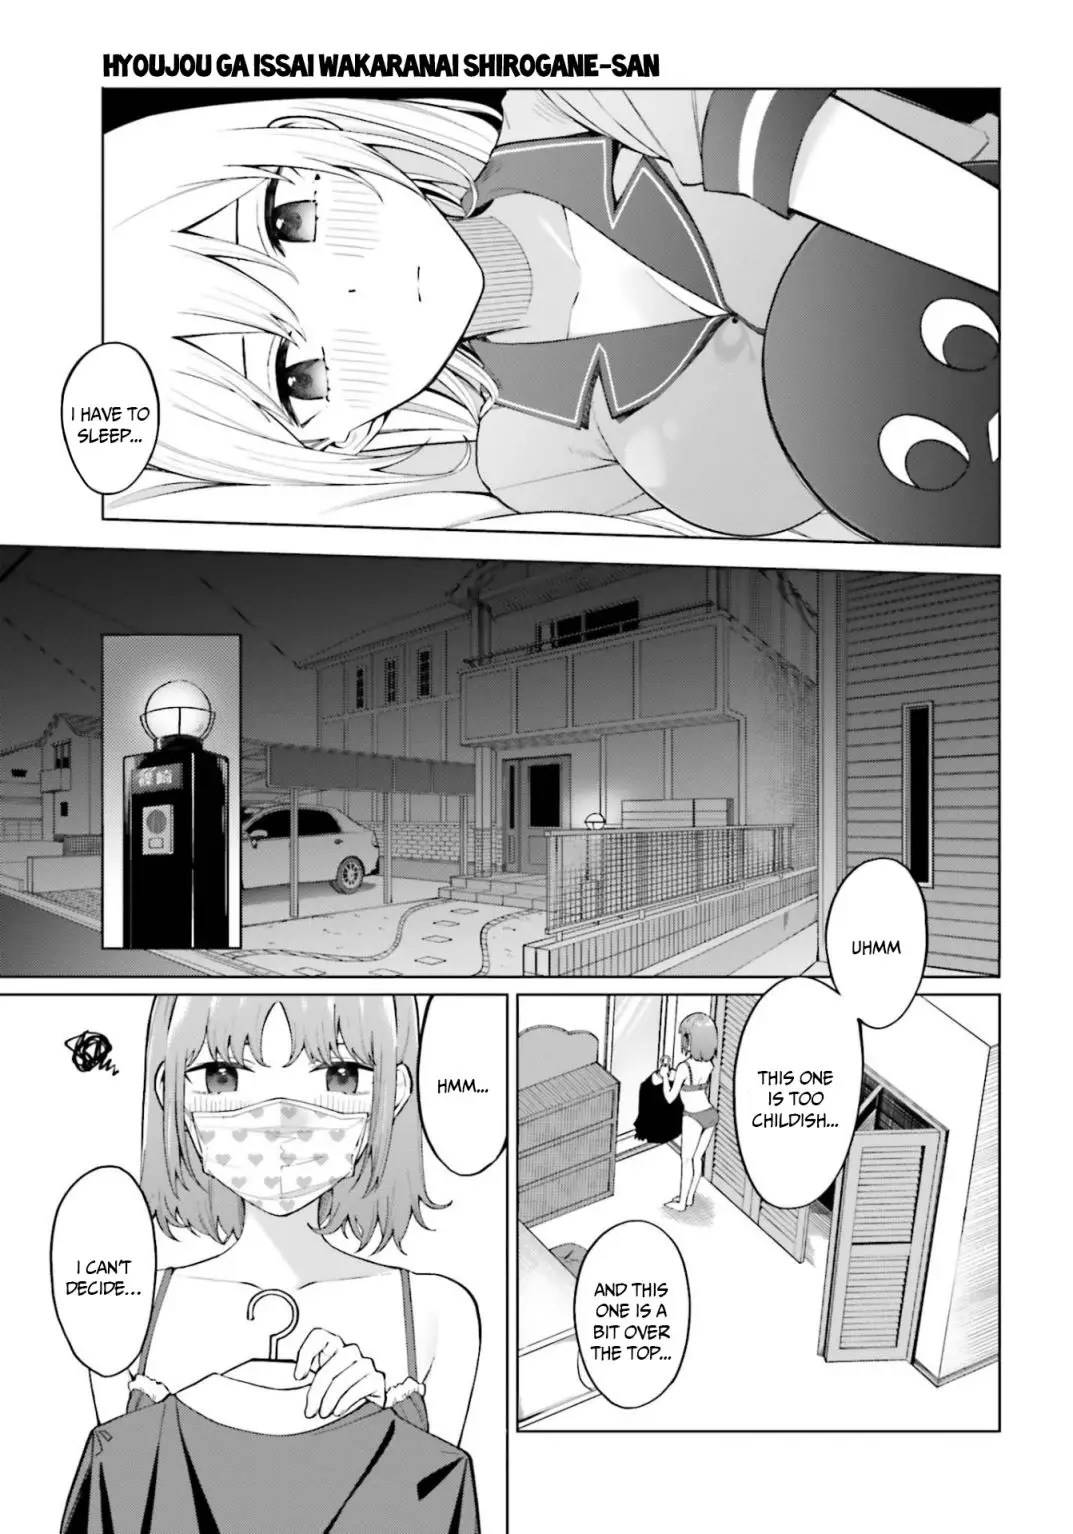 I Don't Understand Shirogane-San's Facial Expression At All - 9 page 18-27a42605